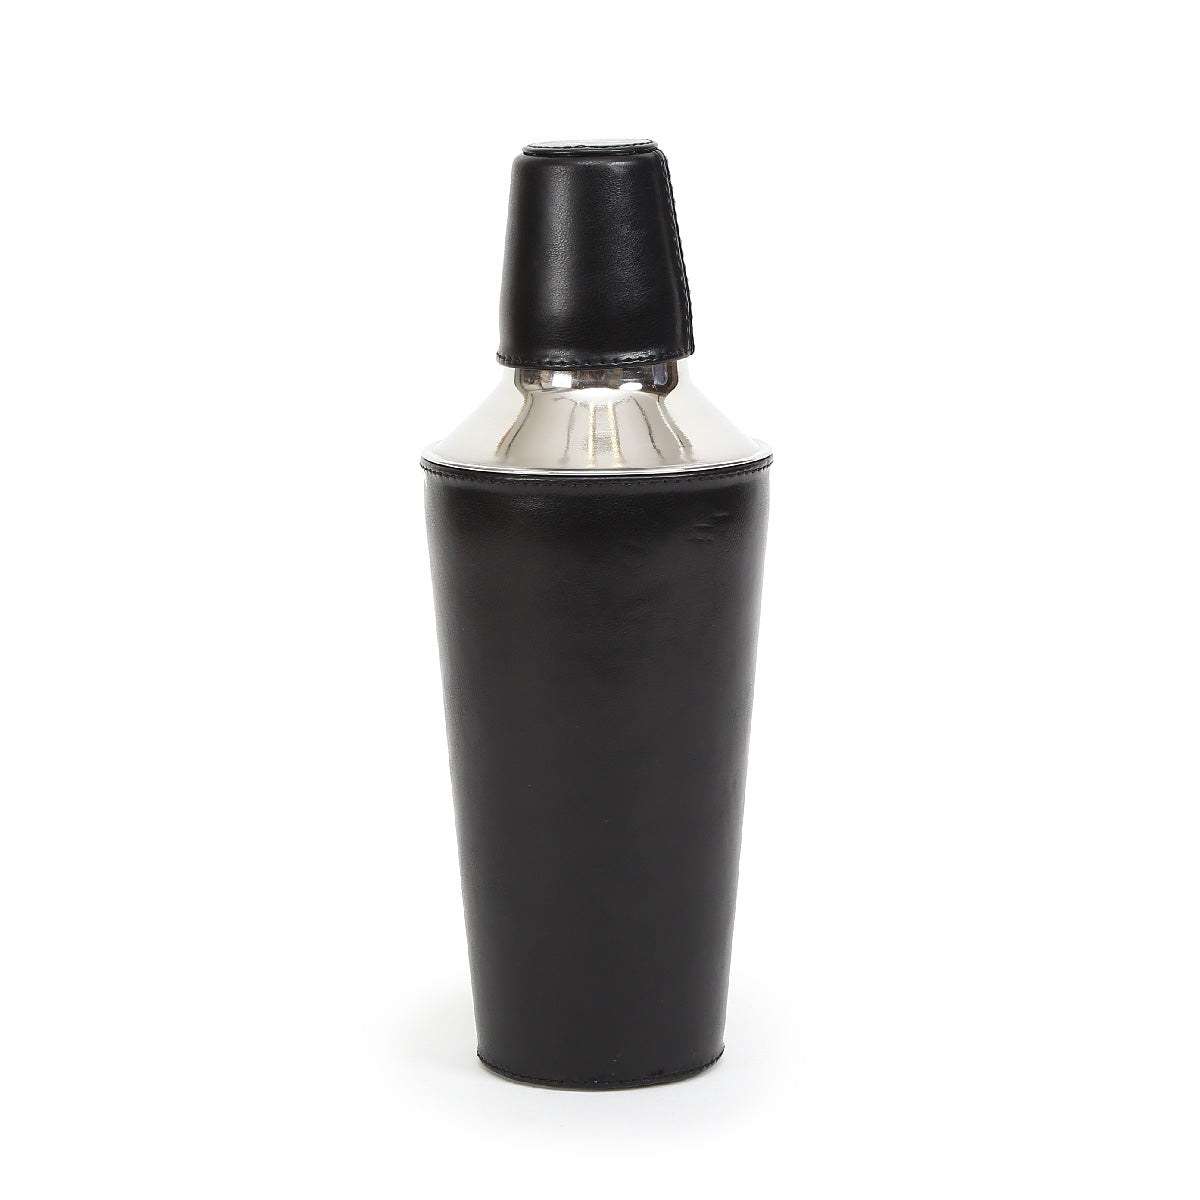 Black Cocktail Shaker With Leather Sheath